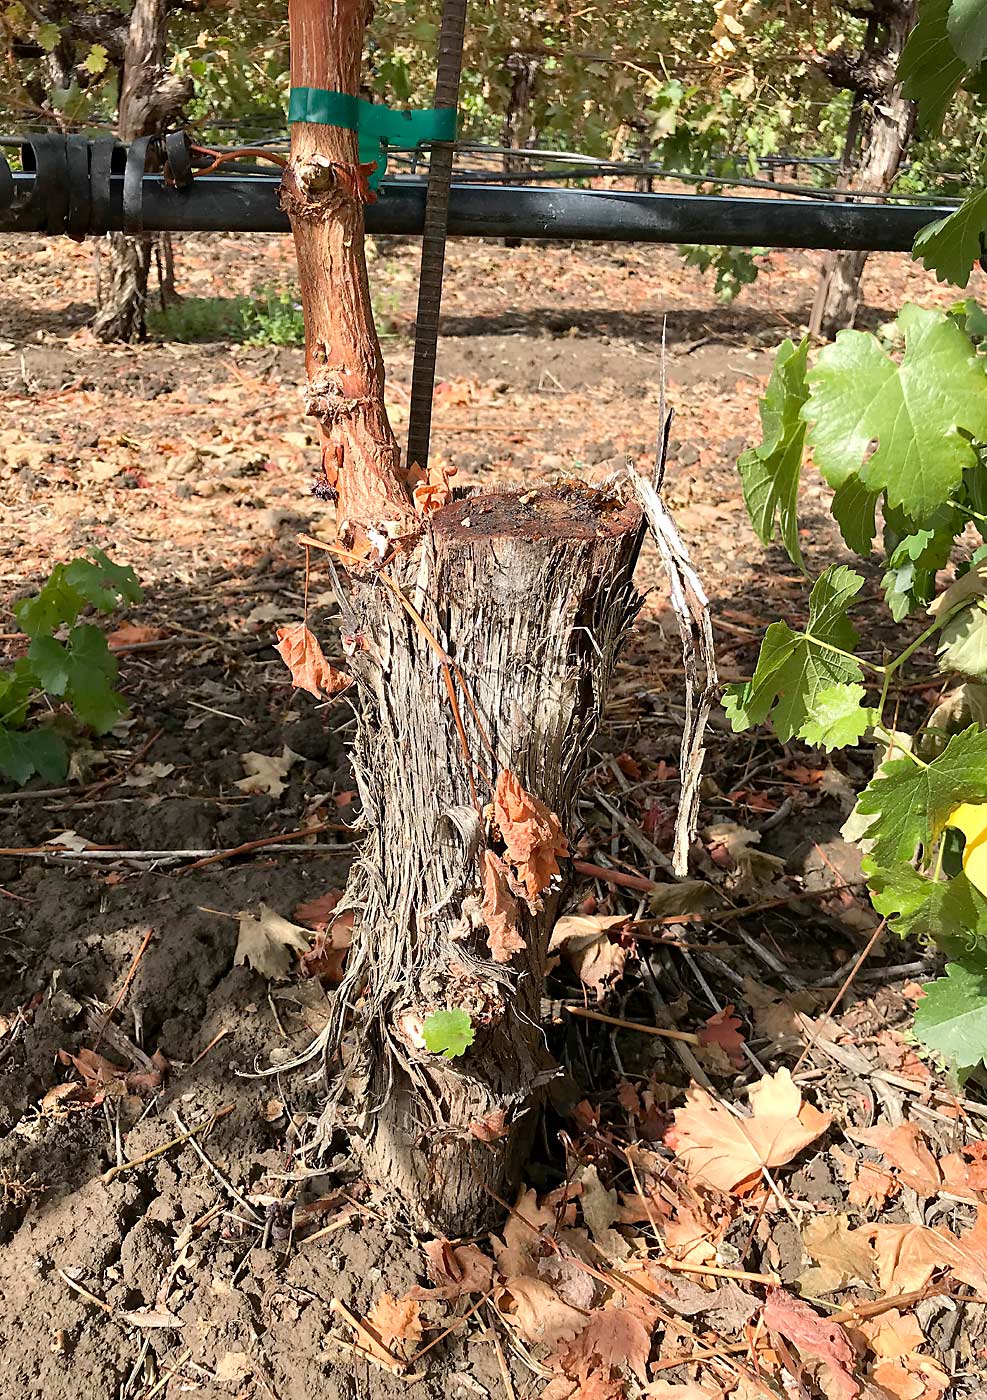 Vine surgery can help vineyards dealing with trunk pathogens stay productive, according to U.S. Department of Agriculture pathologist Kendra Baumgartner. Cutting back the trunk with a chain saw and retraining a new vine allows the healthy root system to boost regrowth, she said in a presentation to Washington growers last year. (Courtesy Kendra Baumgartner)